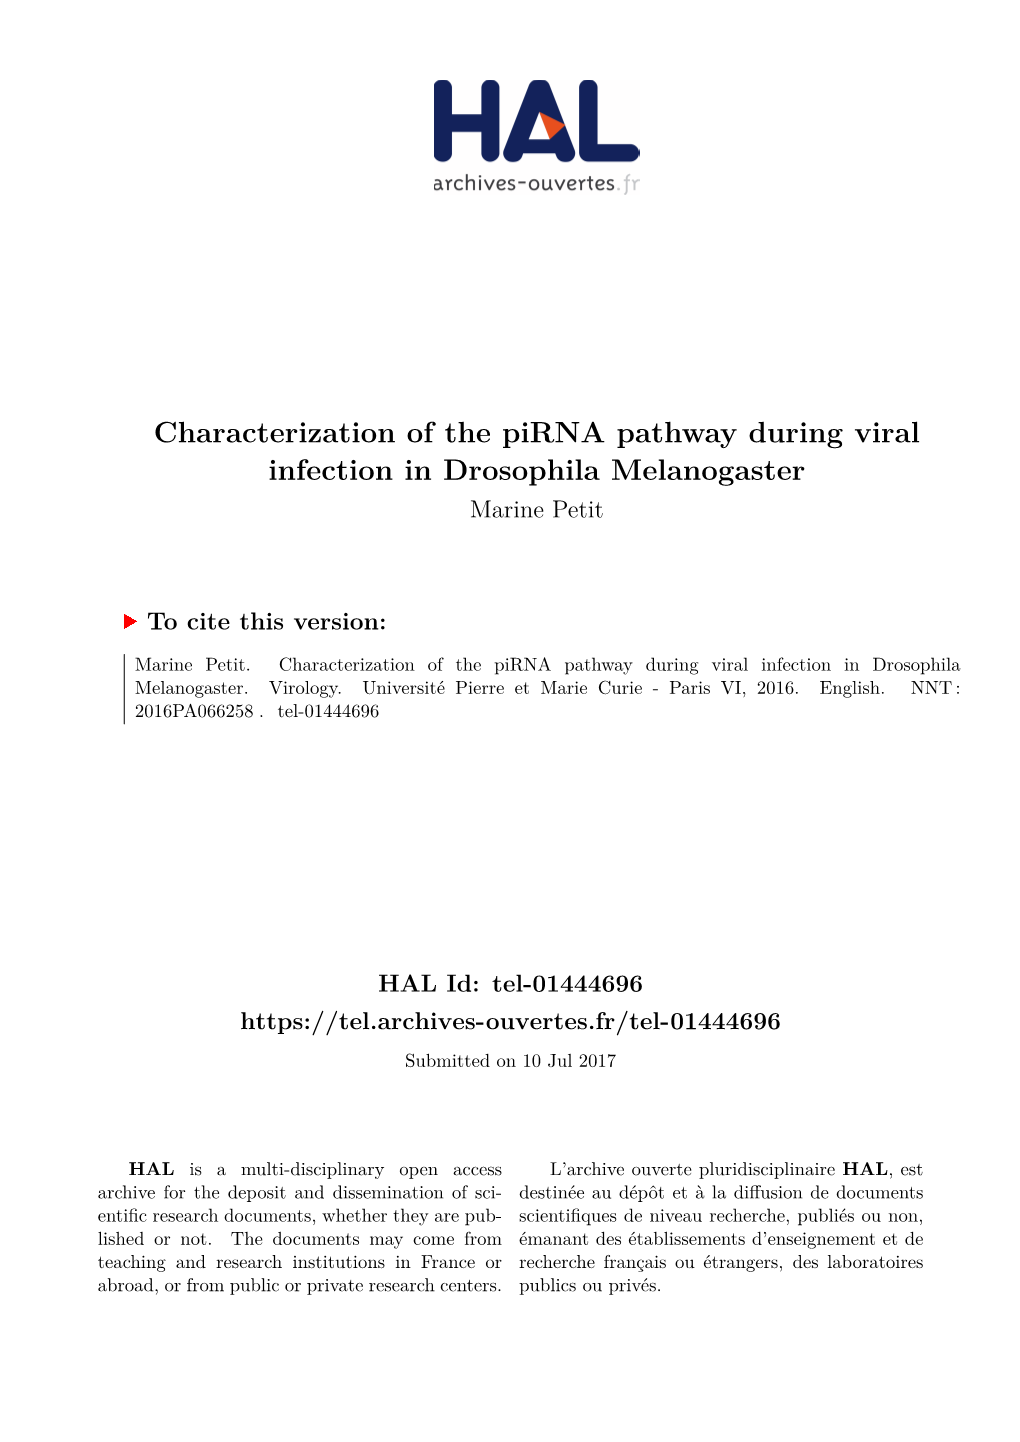 Characterization of the Pirna Pathway During Viral Infection in Drosophila Melanogaster Marine Petit